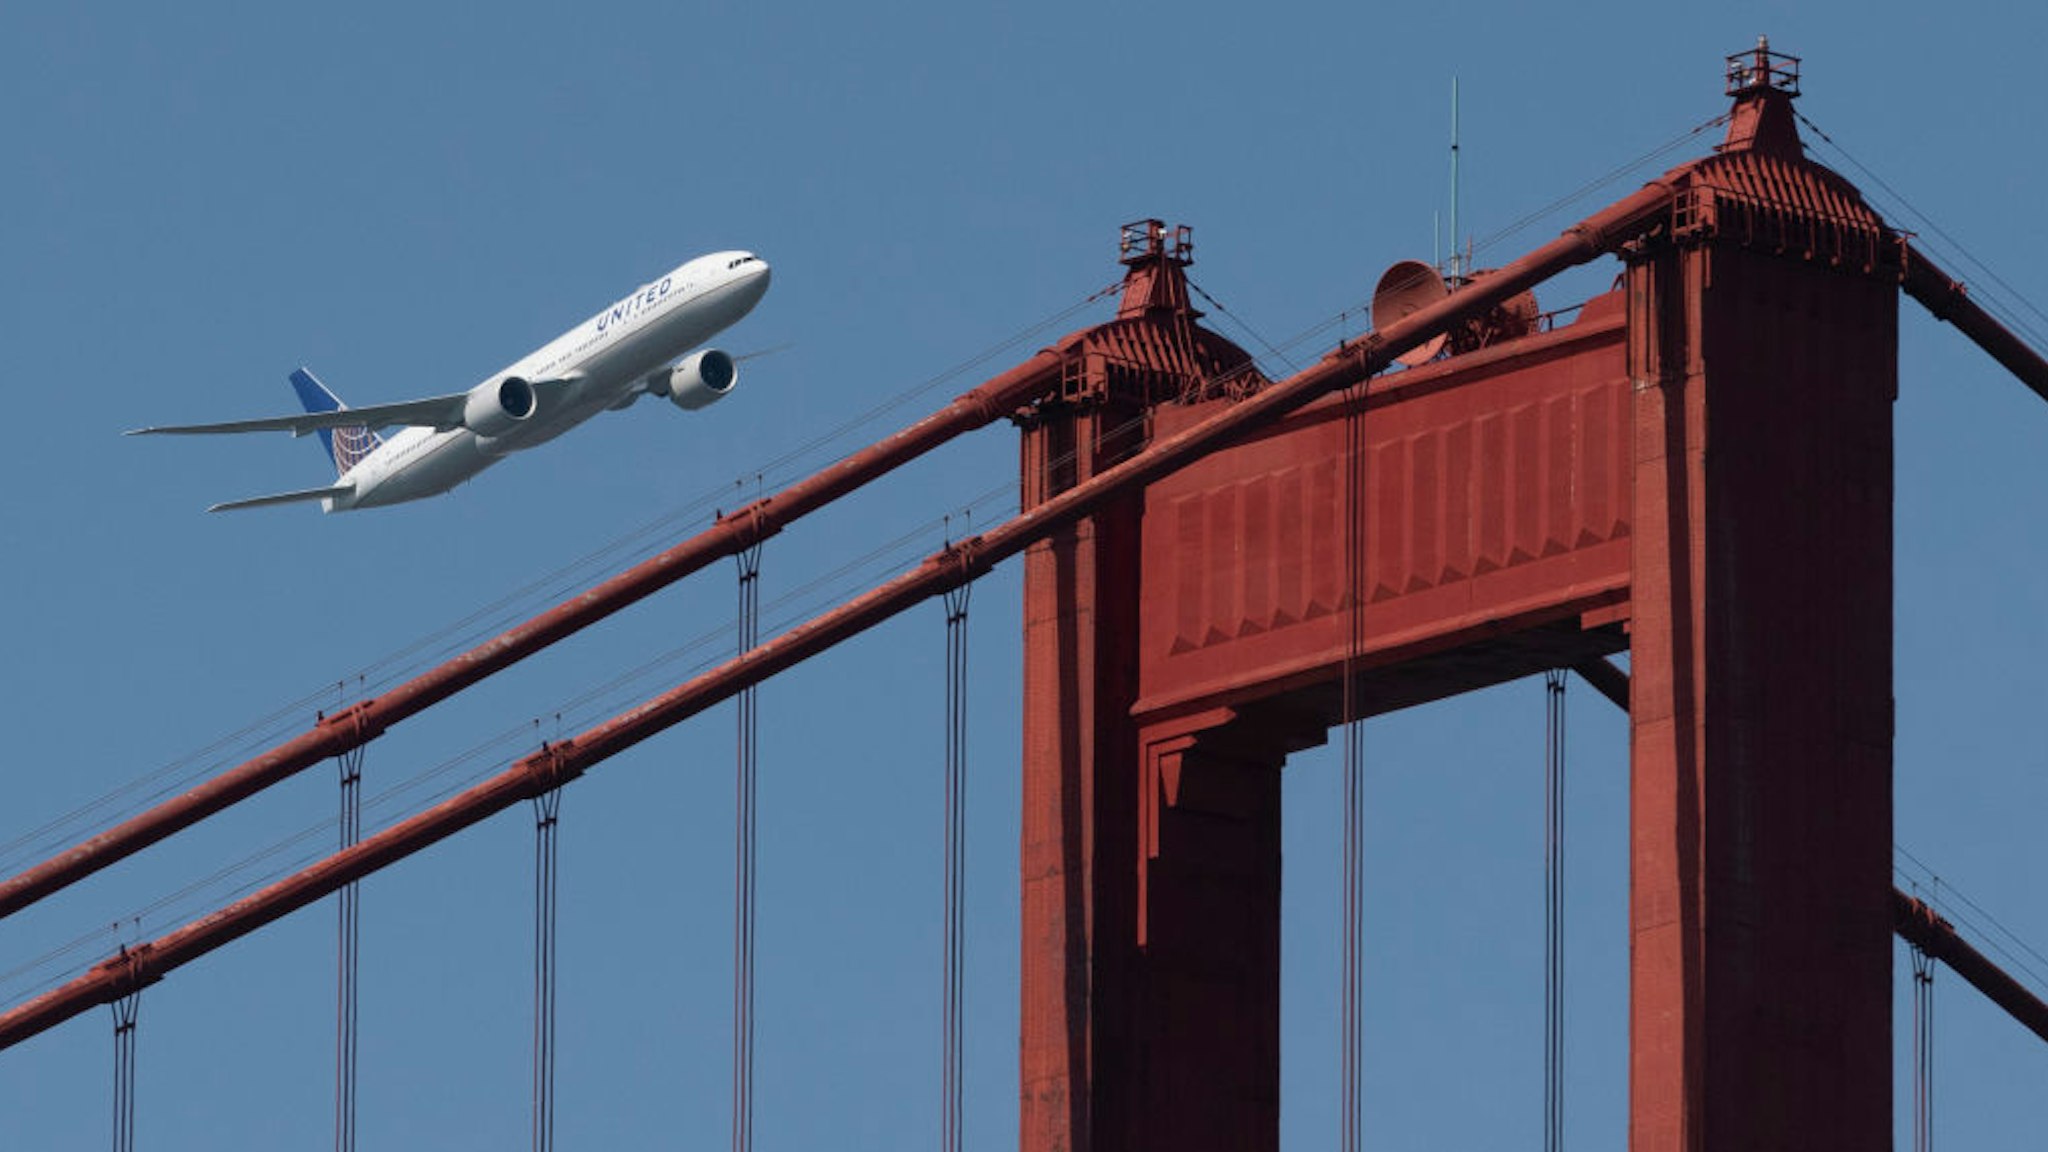 A United Airlines Boeing 777-300ER flies over the Golden Gate Bridge during Fleet Week 2019 in San Francisco, California on October 11, 2019. United Airlines will hold a conference call to discuss third-quarter 2019 financial results on Wednesday, October 16. (Photo by Yichuan Cao/NurPhoto)